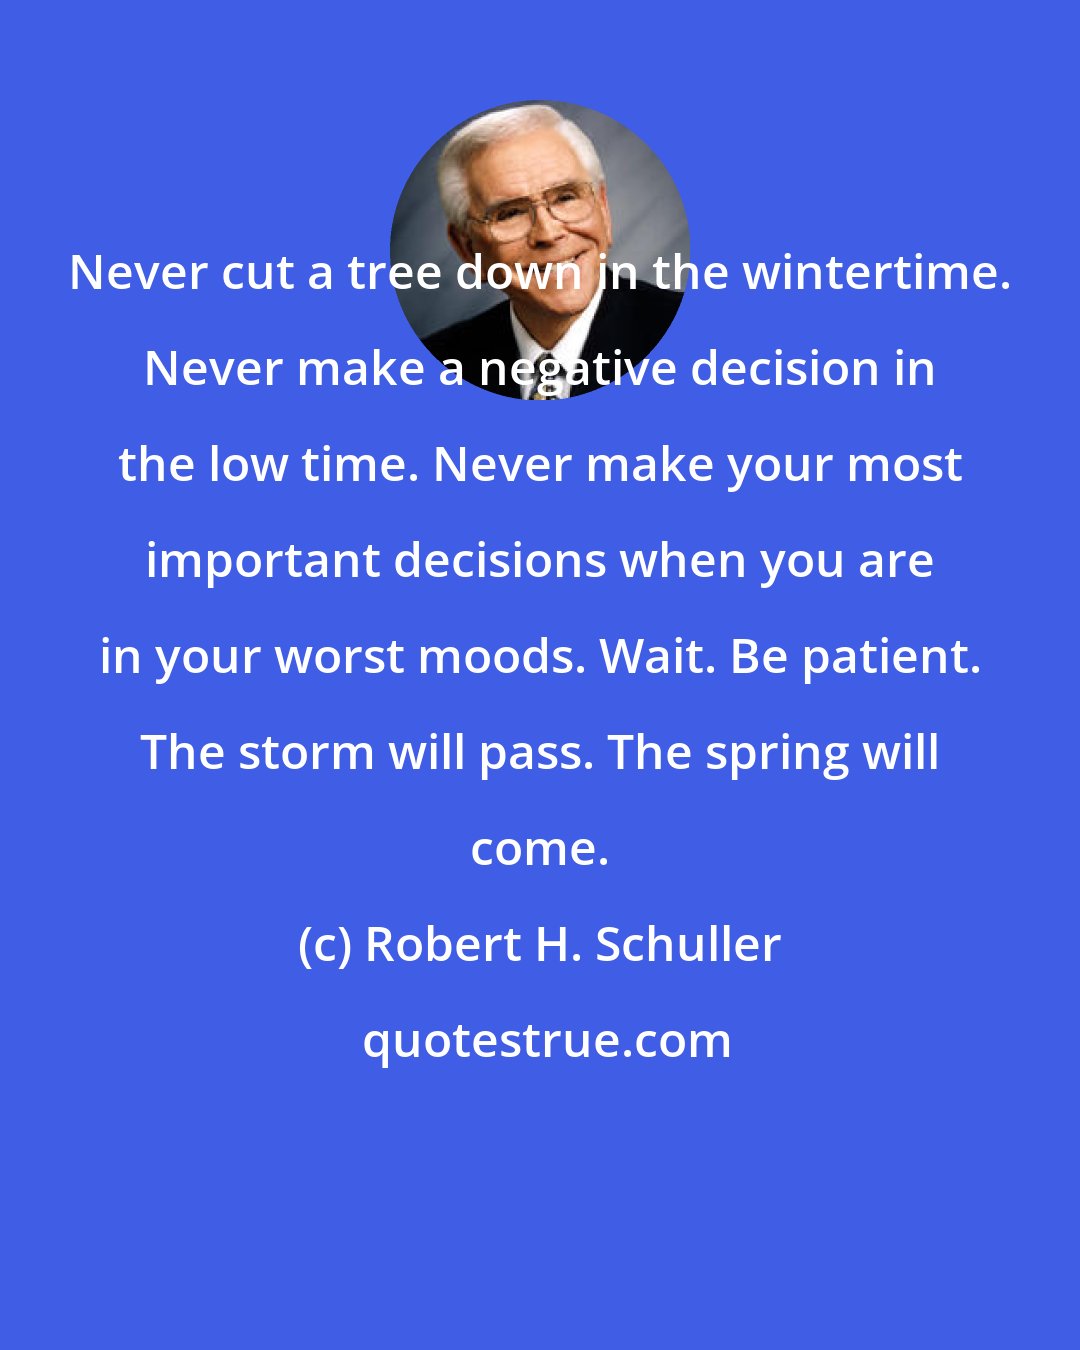 Robert H. Schuller: Never cut a tree down in the wintertime. Never make a negative decision in the low time. Never make your most important decisions when you are in your worst moods. Wait. Be patient. The storm will pass. The spring will come.